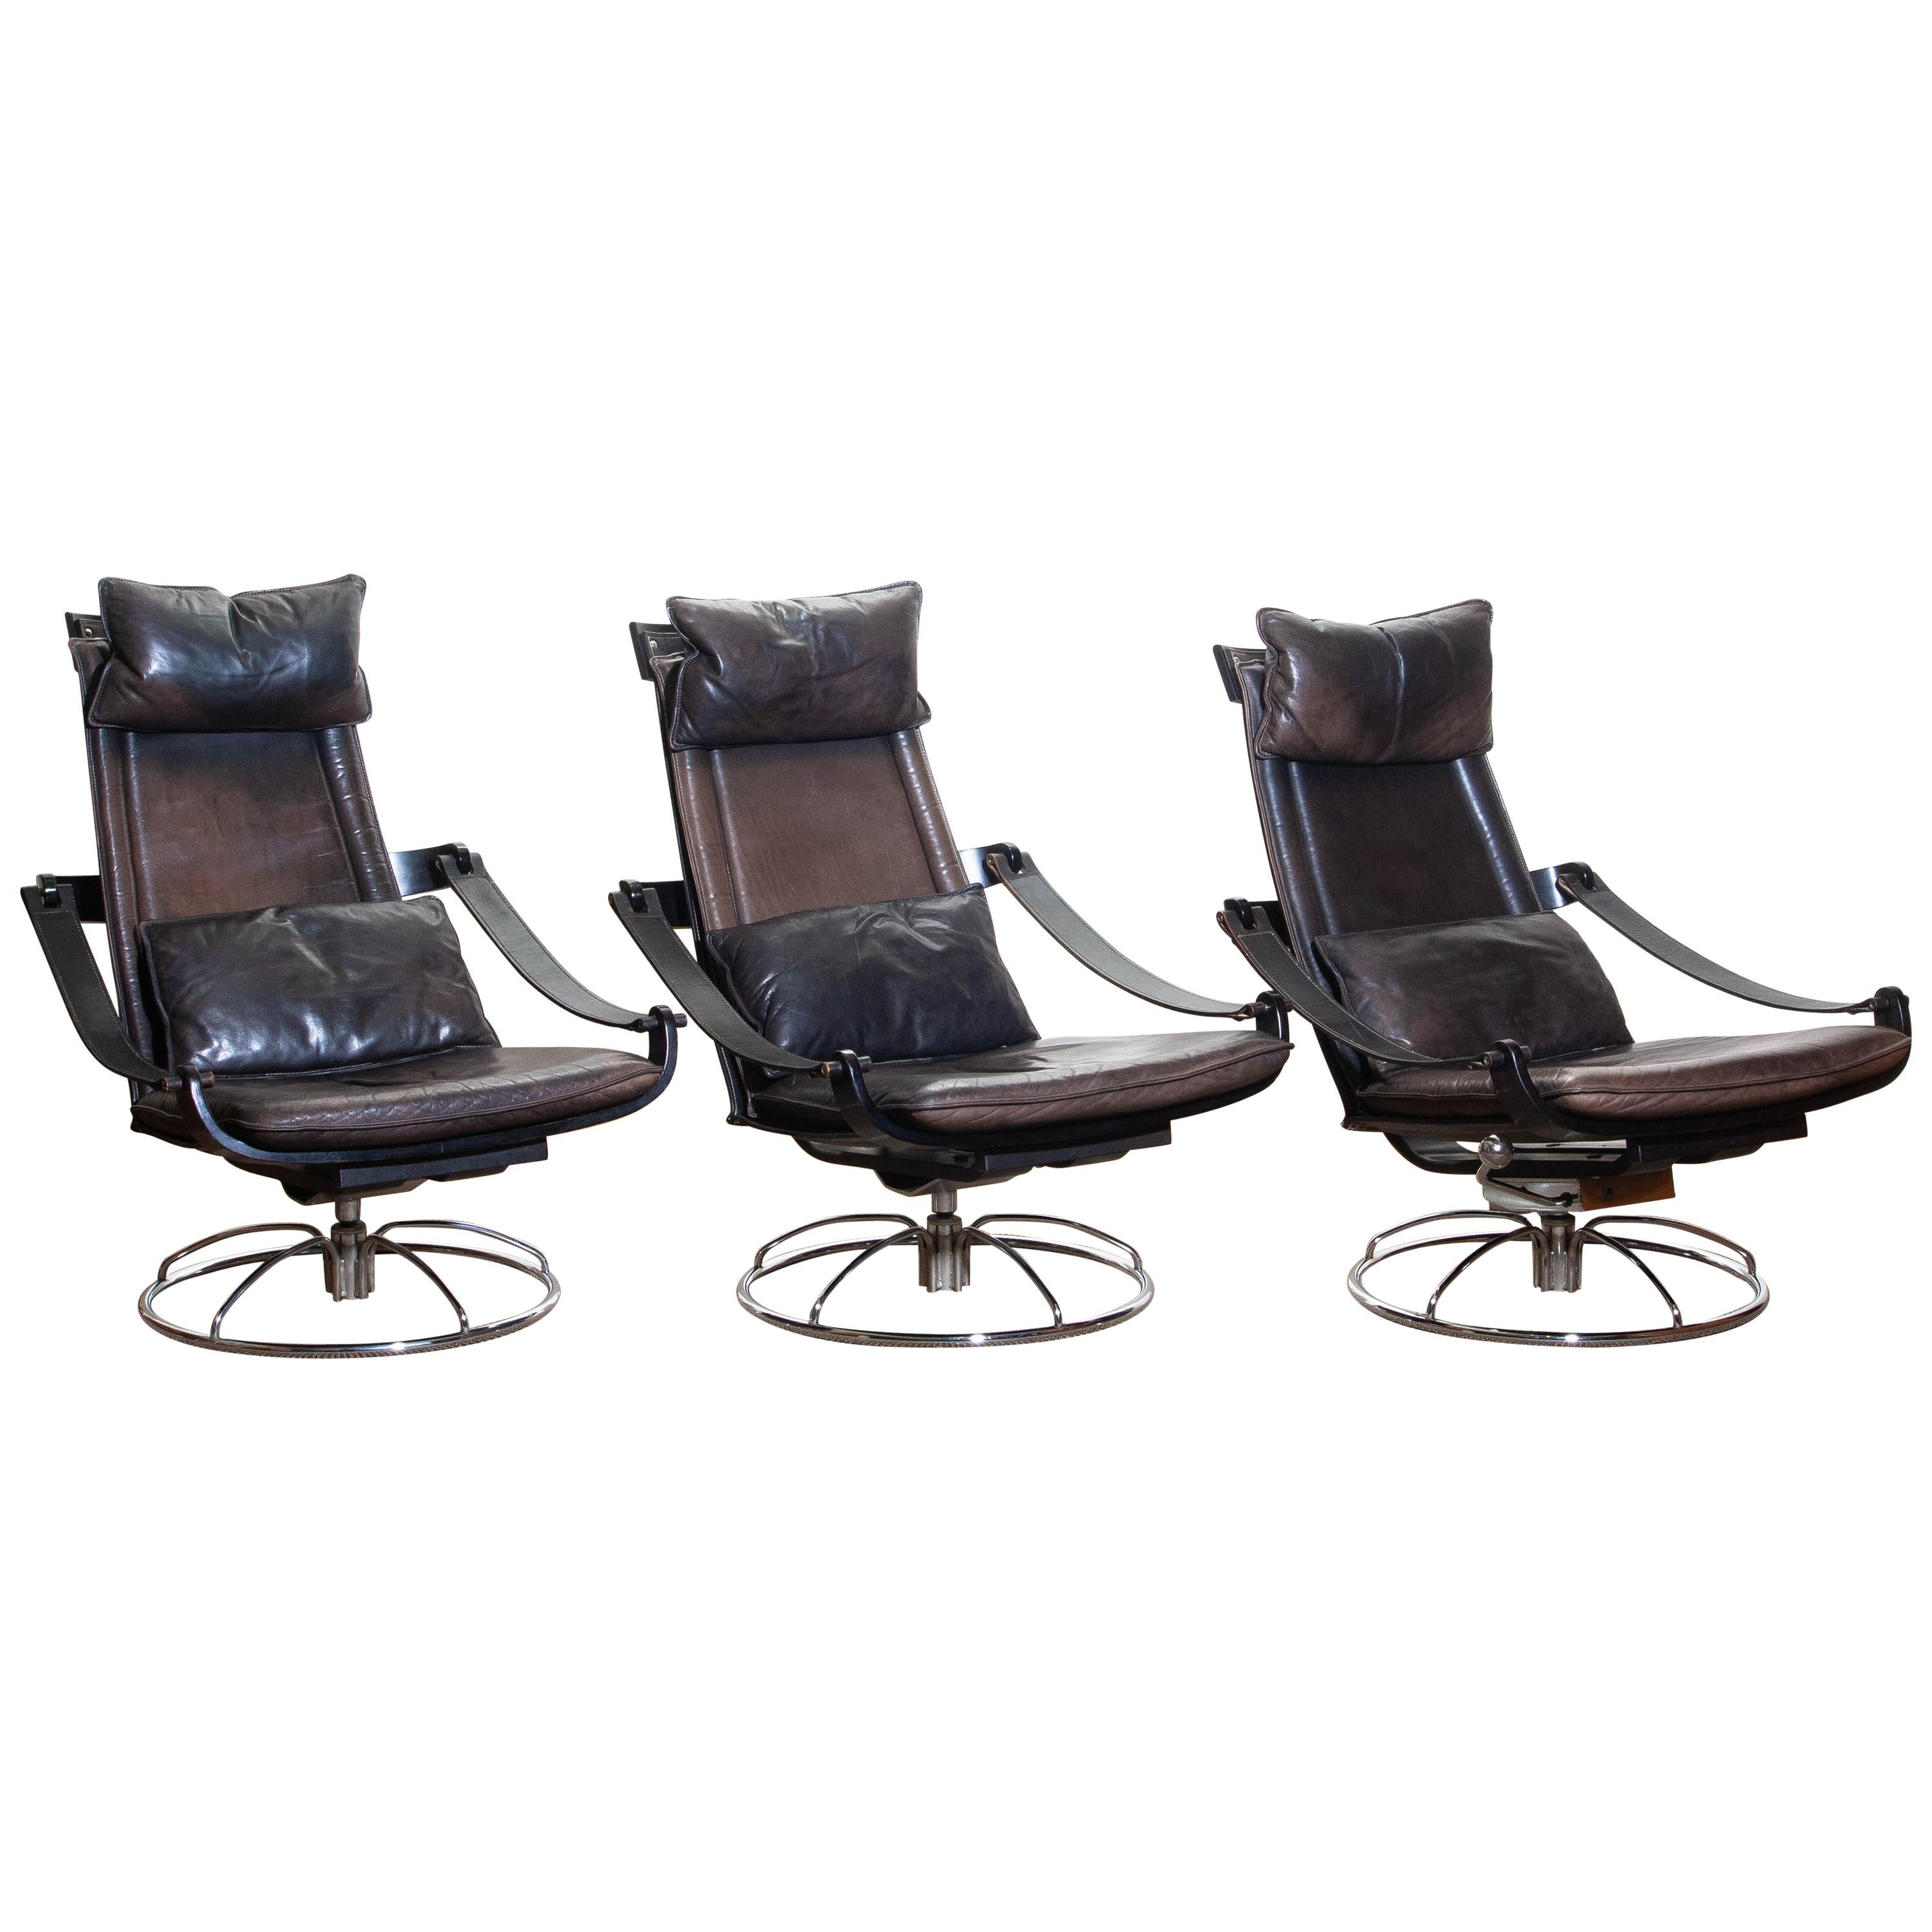 1970s, Three Leather Swivel / Relax Chairs by Ake Fribytter for Nelo, Sweden